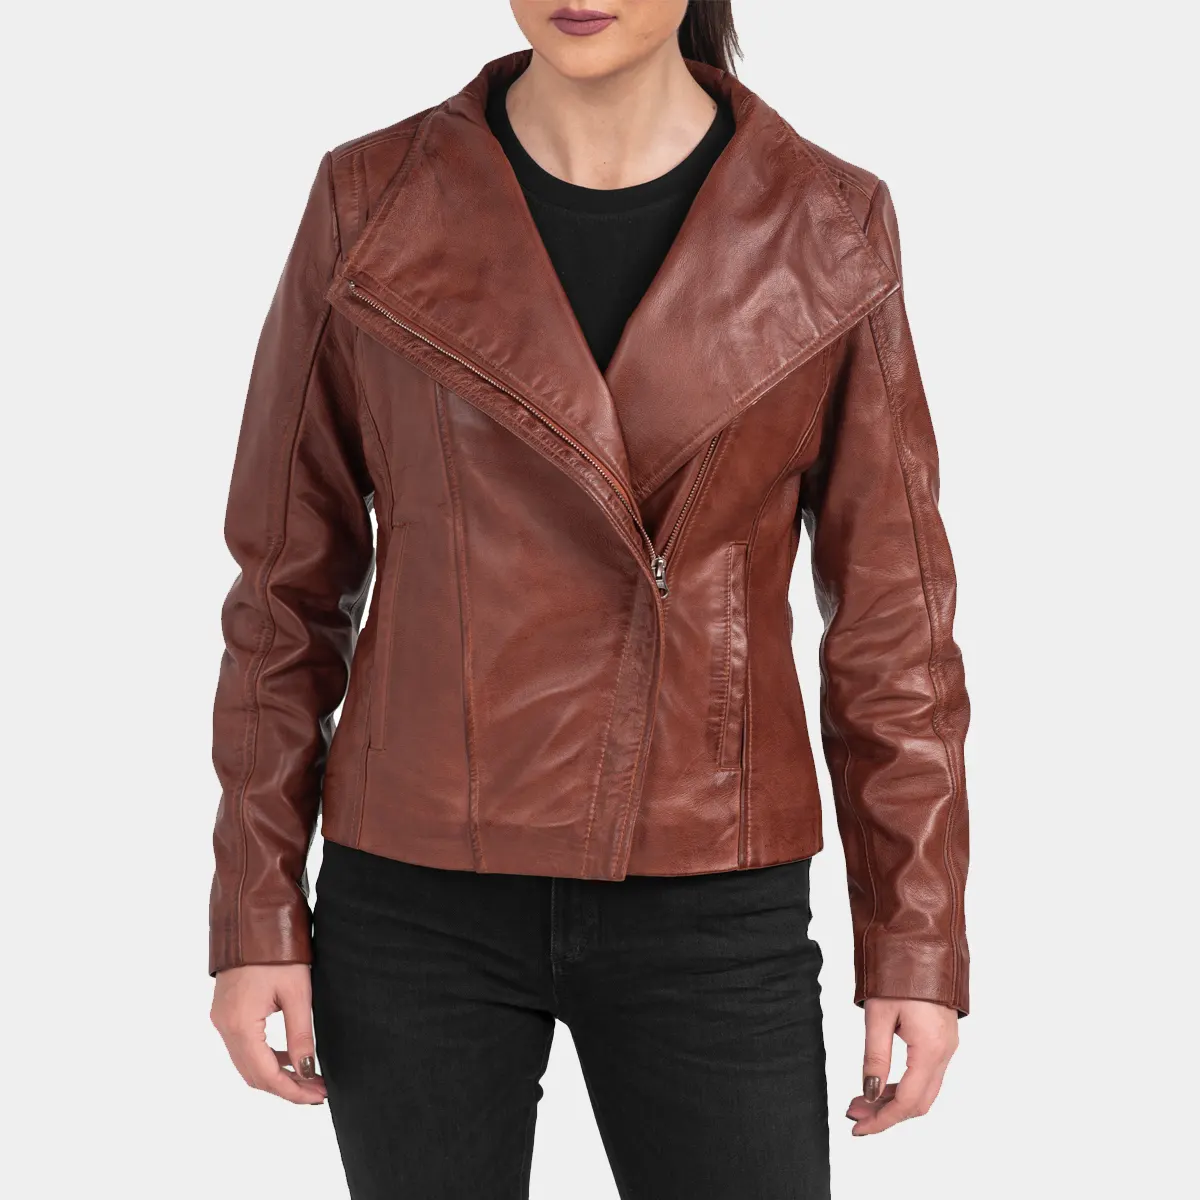 Arezzo Cognac Cafe Racer Style Womens Leather Jacket